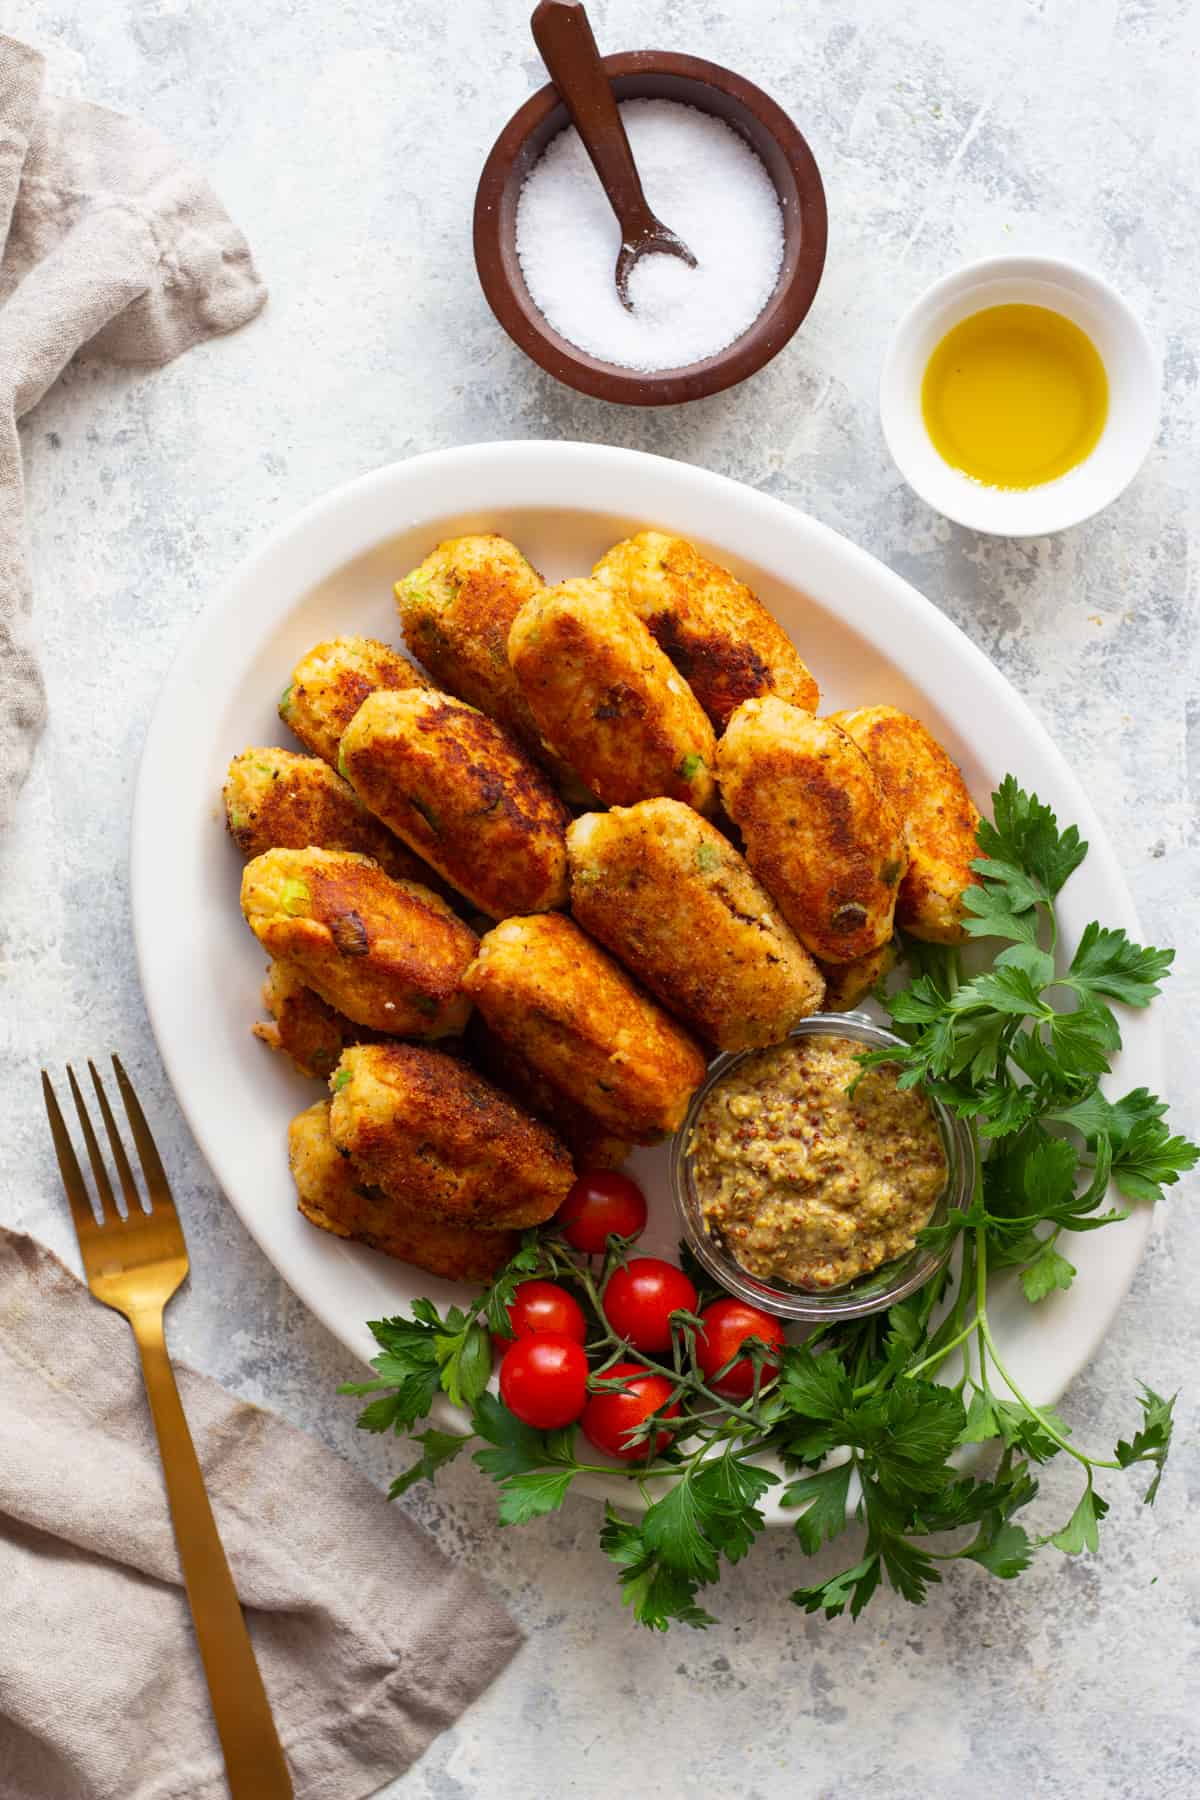 Planning for the month of Ramadan can be challenging. Check out our best Ramadan recipes for inspiration and planning healthy and satisfying meals. You can find everything from Suhoor meal ideas to Iftar ideas plus sweet treats and drinks to keep you energized through this holy month.  